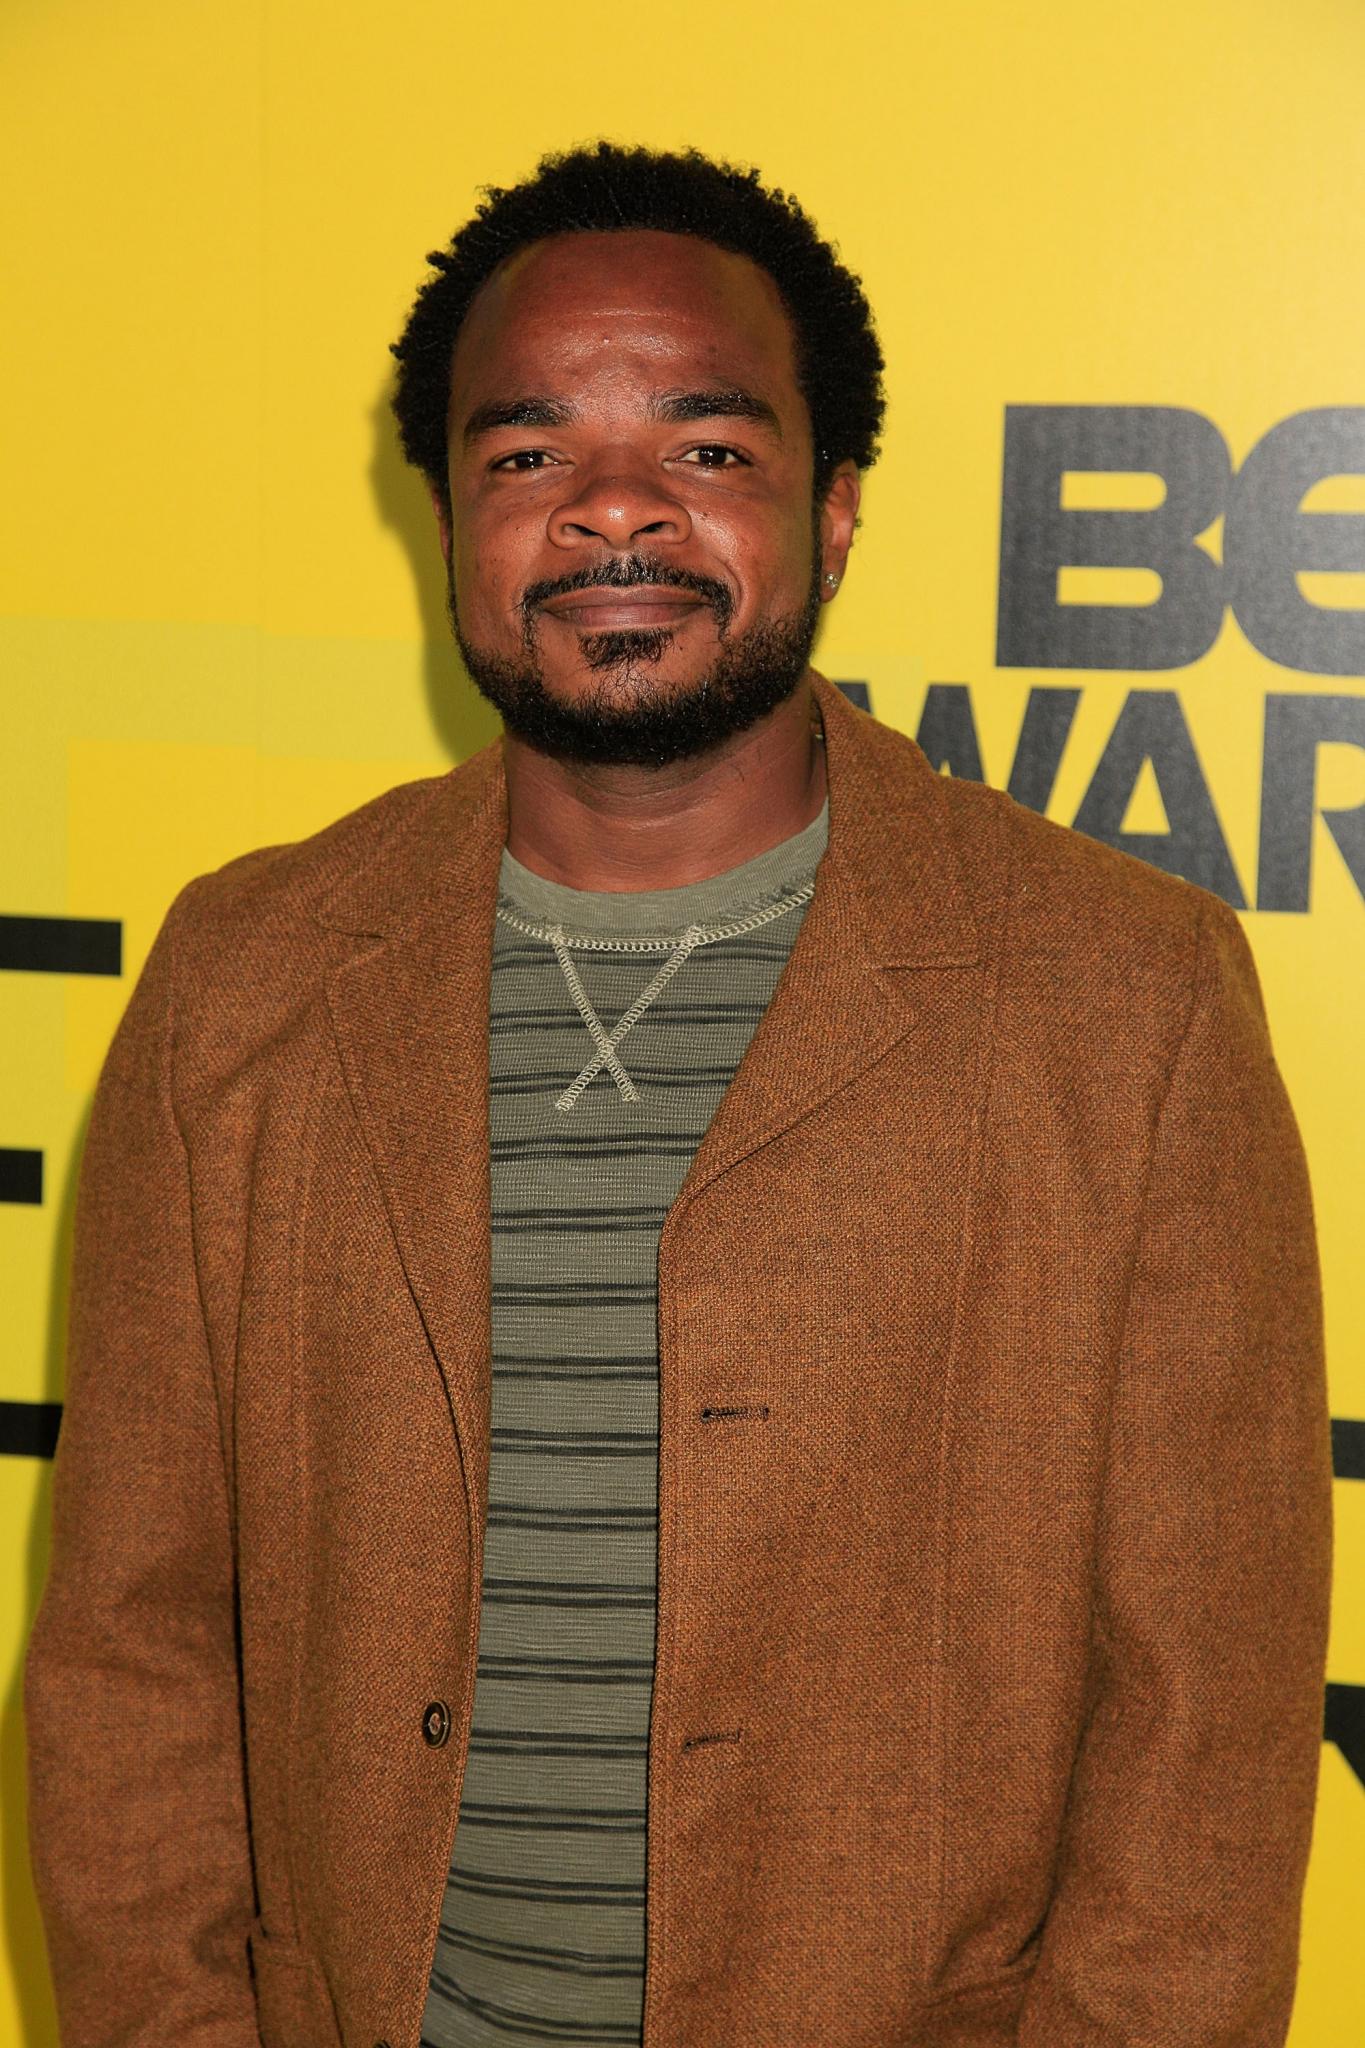 F. Gary Gray Makes History as Highest-Grossing Black Director for 'Straight Outta Compton'